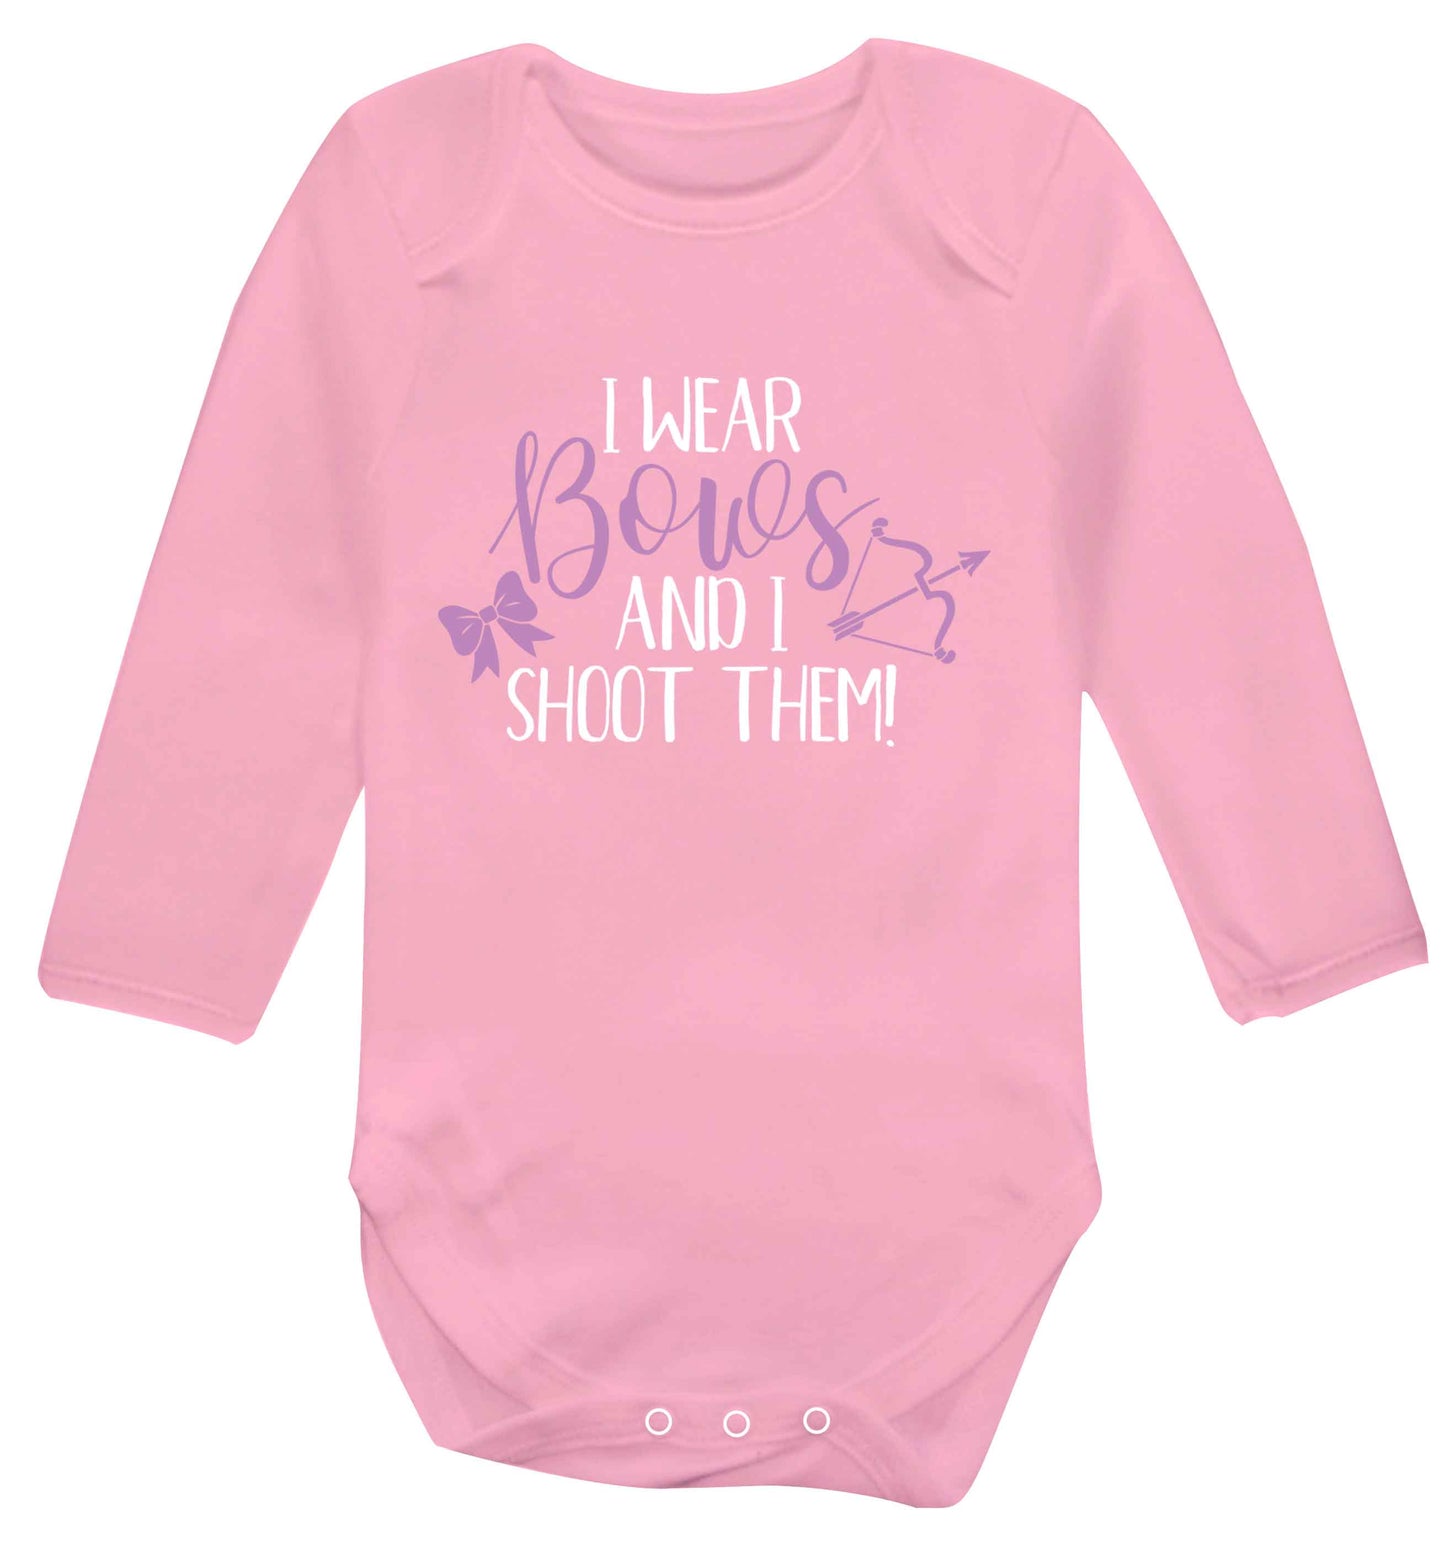 I wear bows and I shoot them Baby Vest long sleeved pale pink 6-12 months